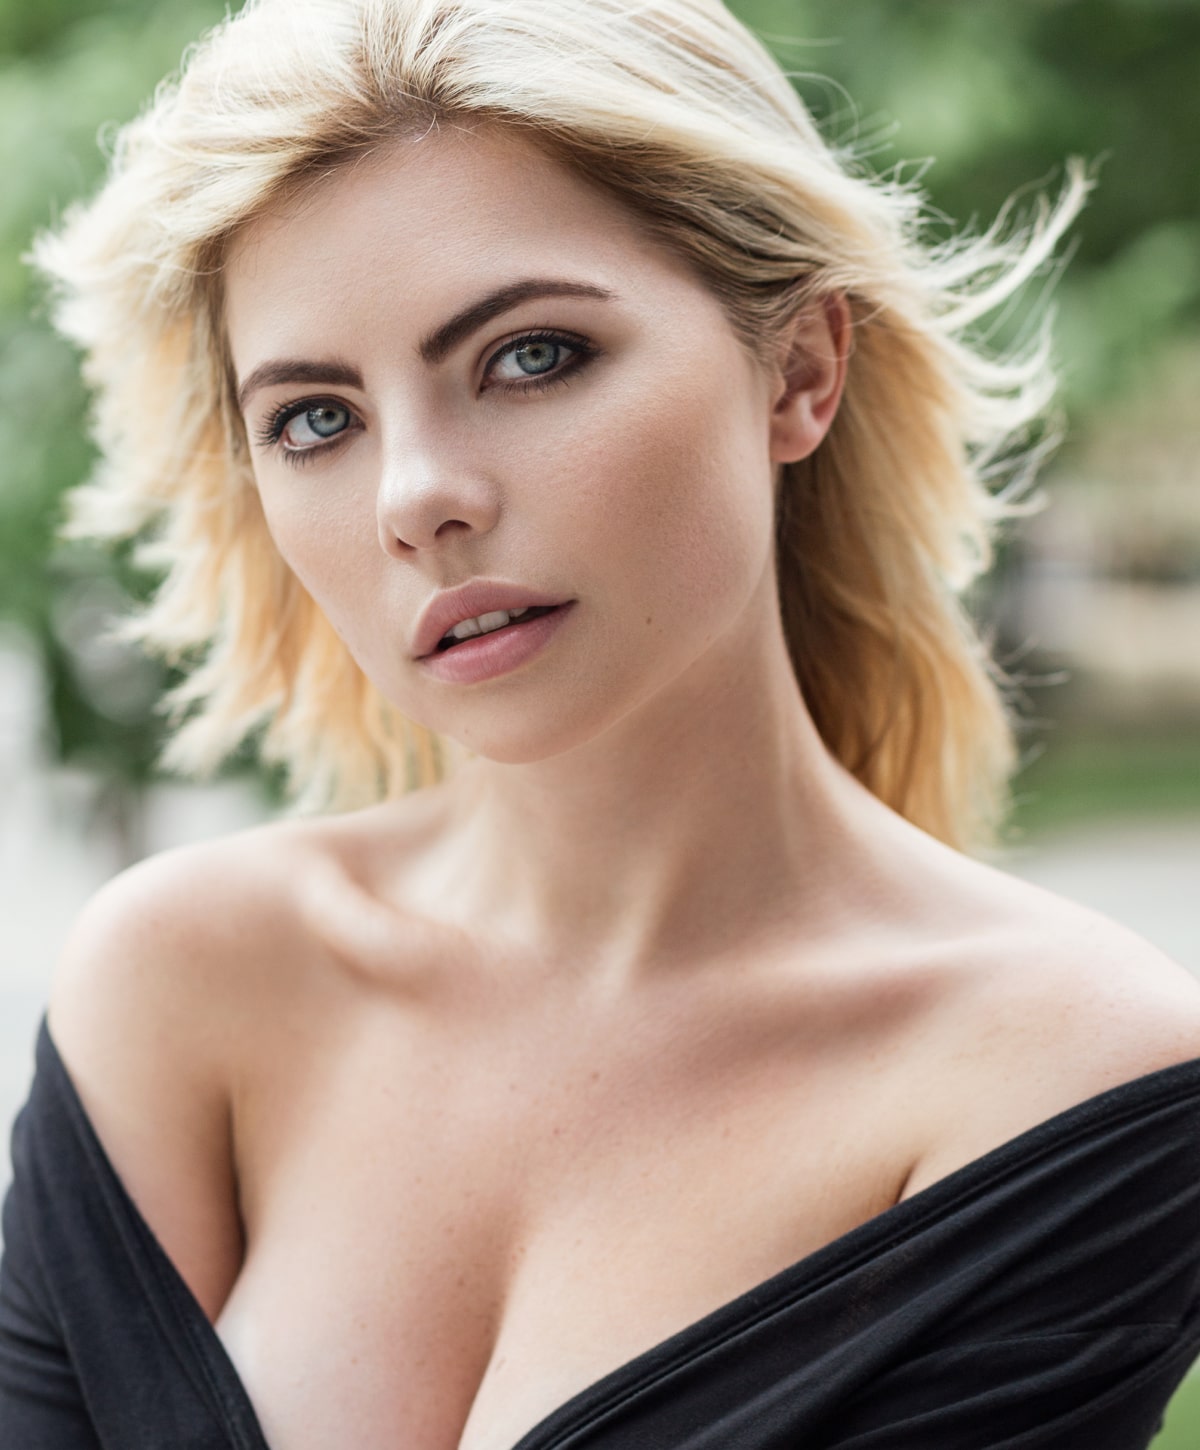 Kansas City breast lift model with blonde hair